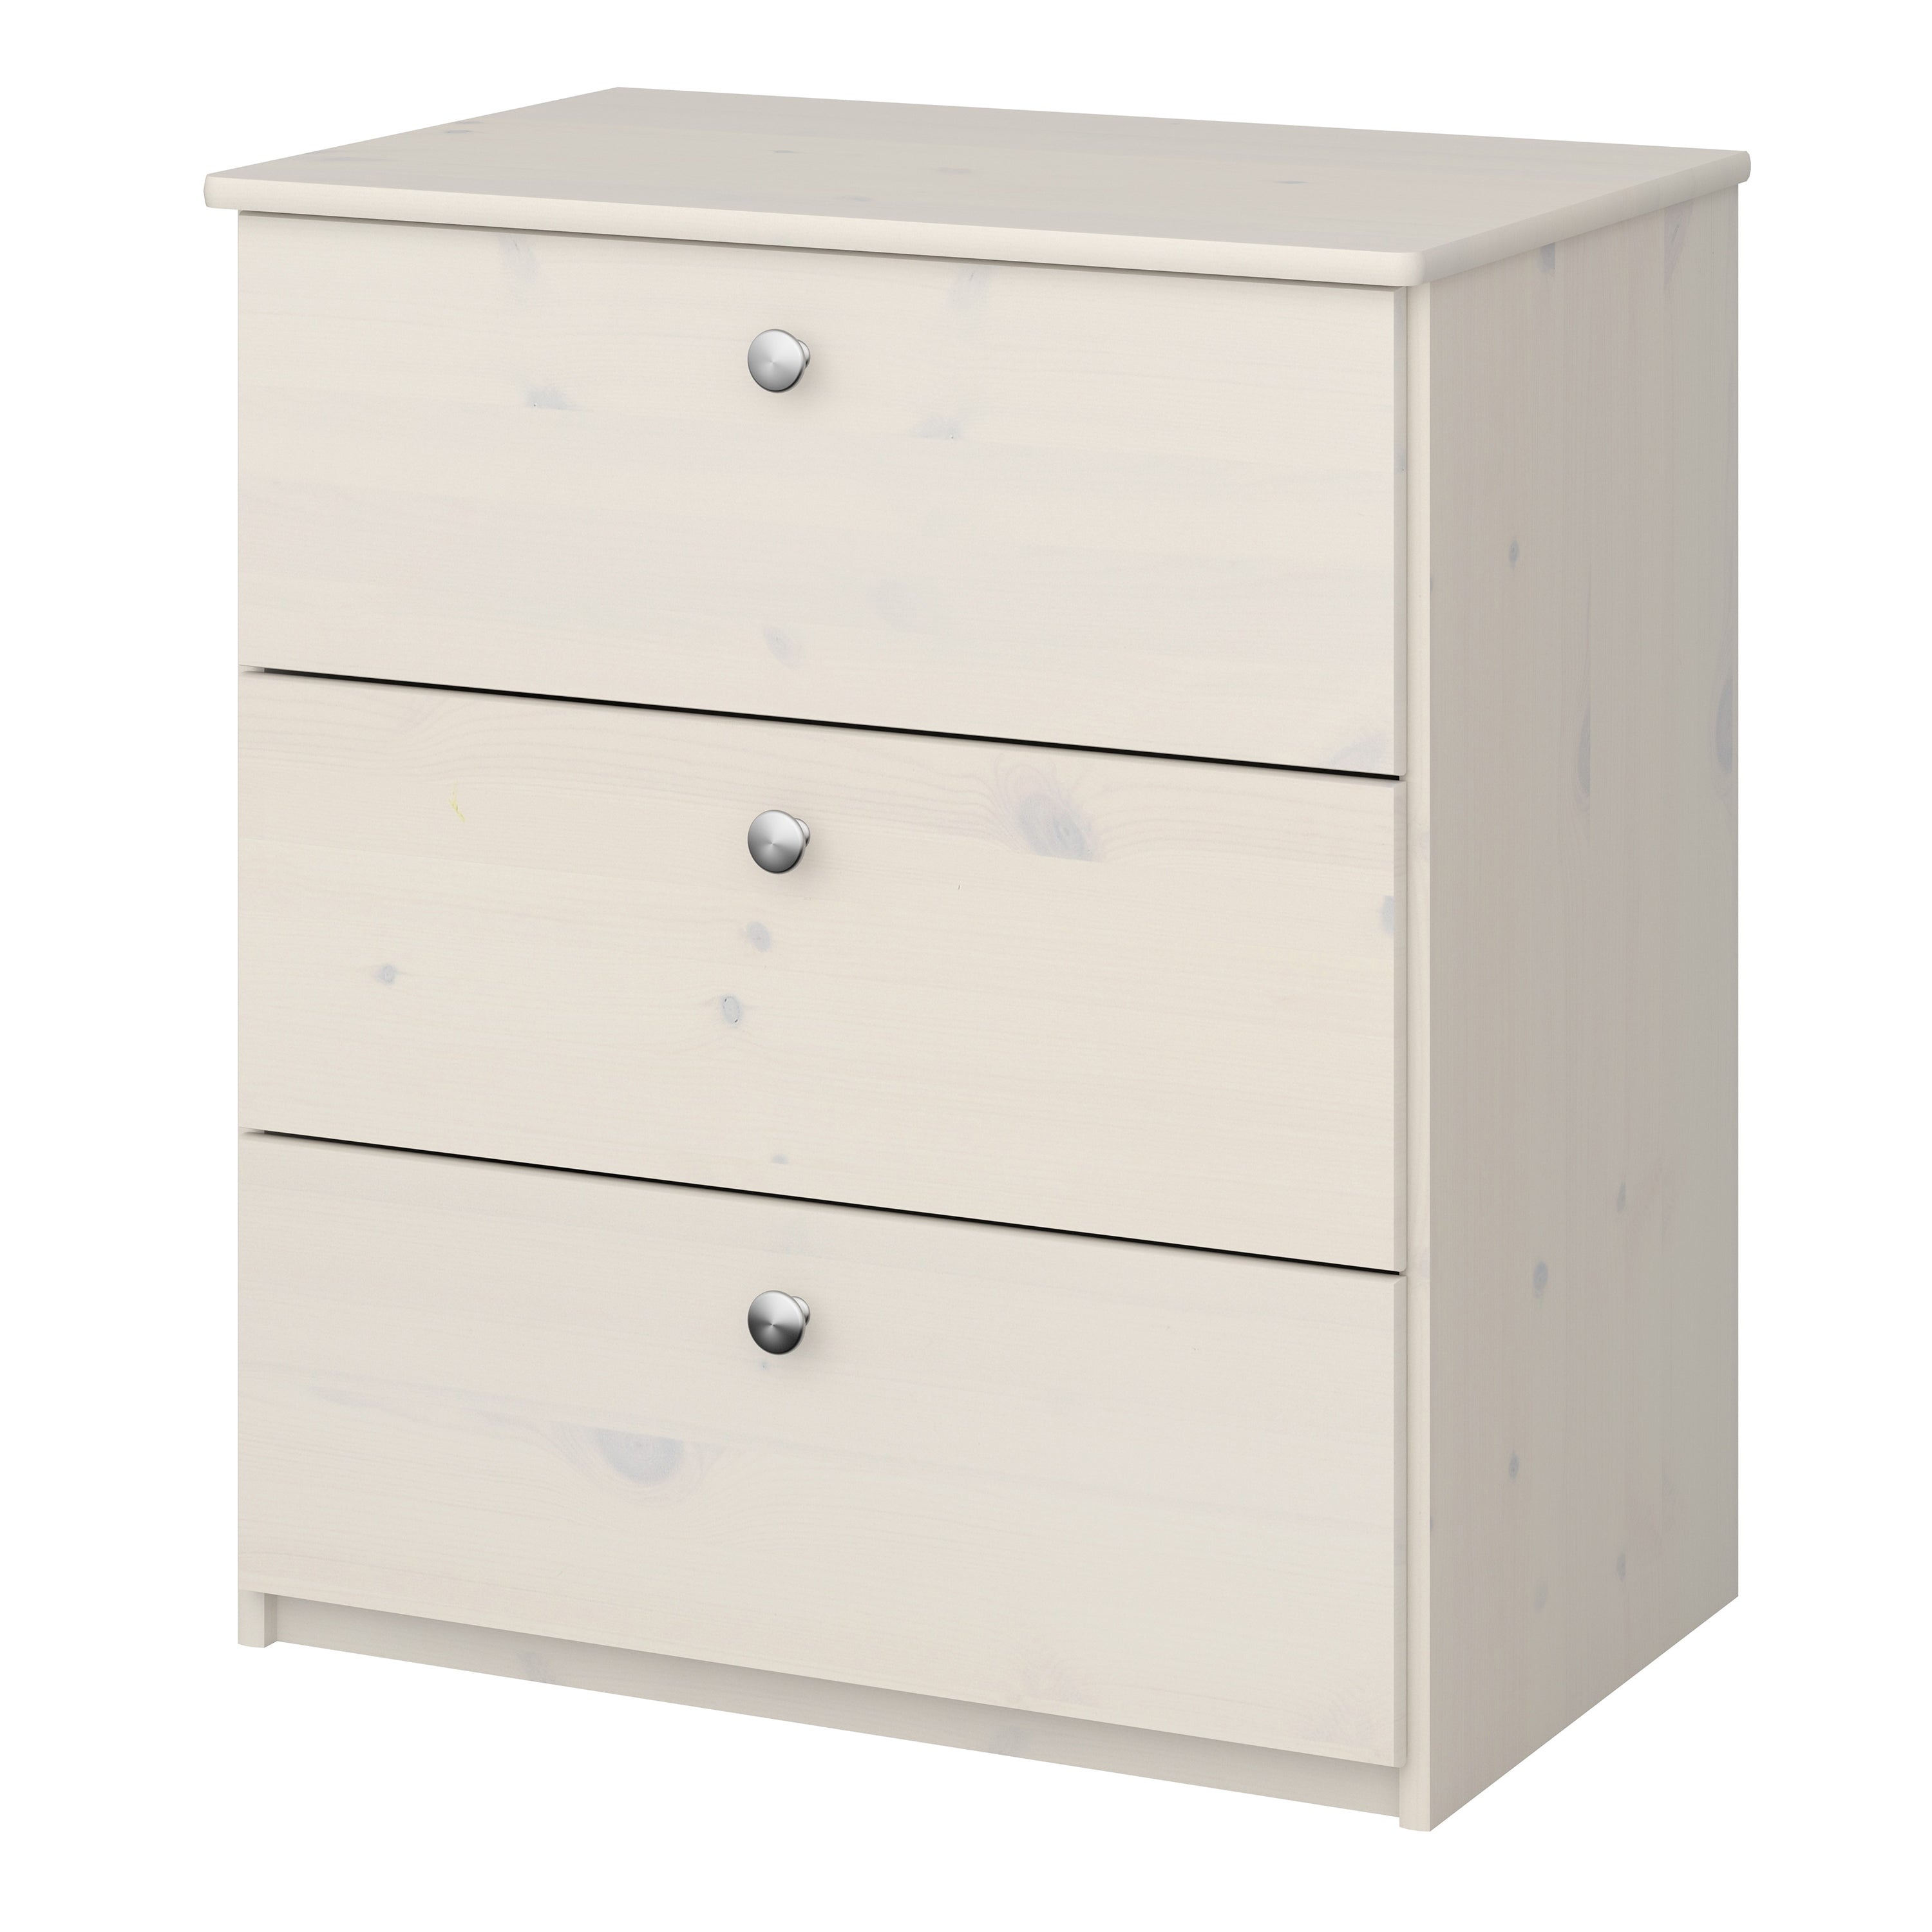 Steens for Kids 3 Drawer Chest White Washed